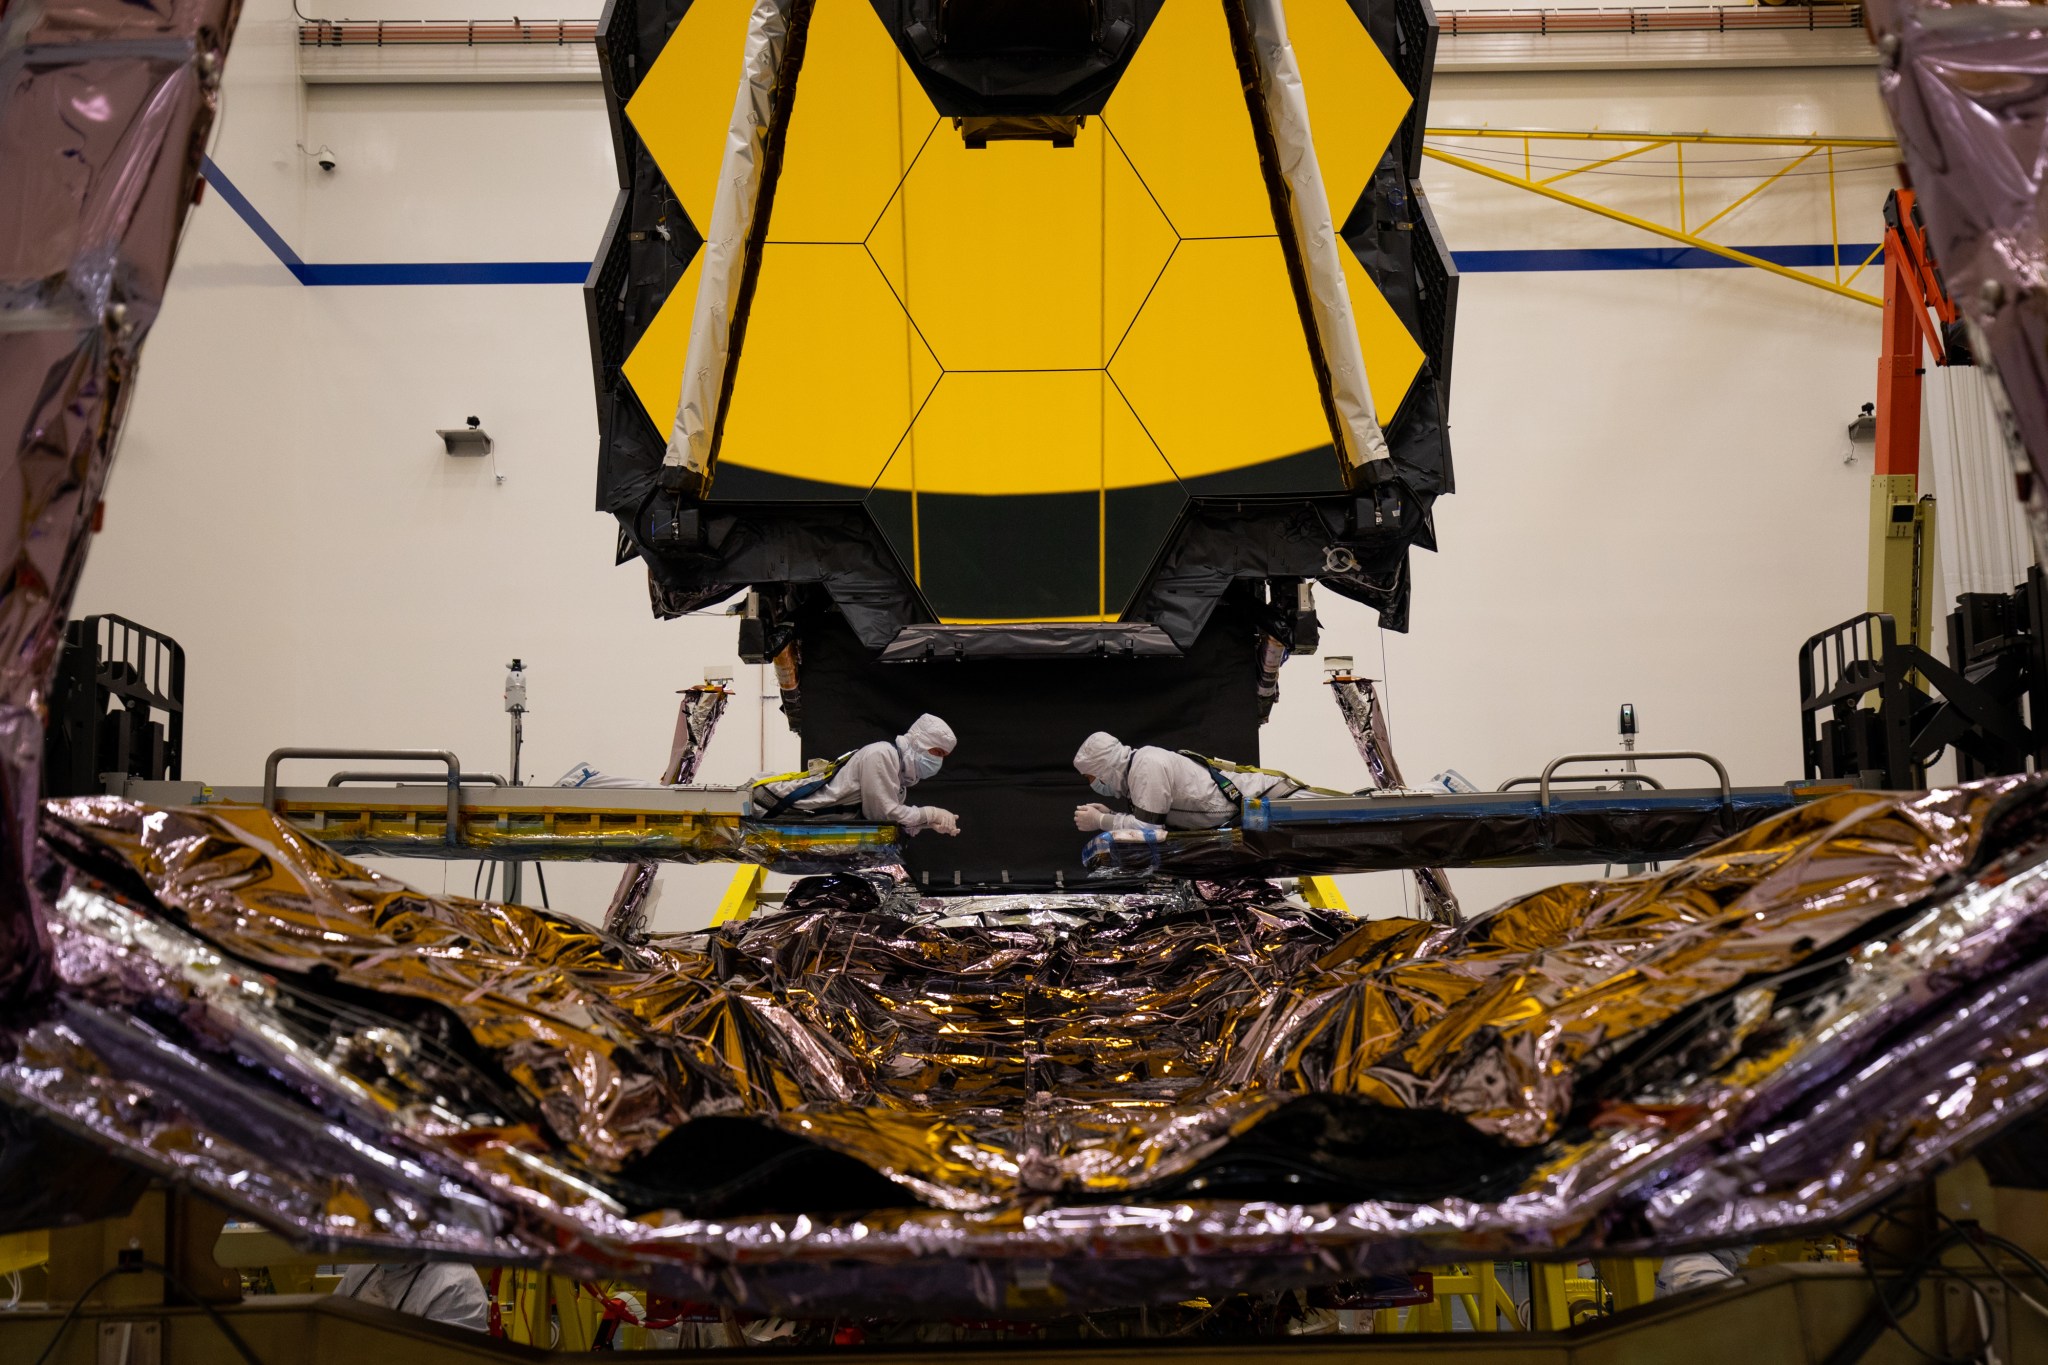 Technicians inspect a critical part of the James Webb Space Telescope known as the Deployable Tower Assembly.